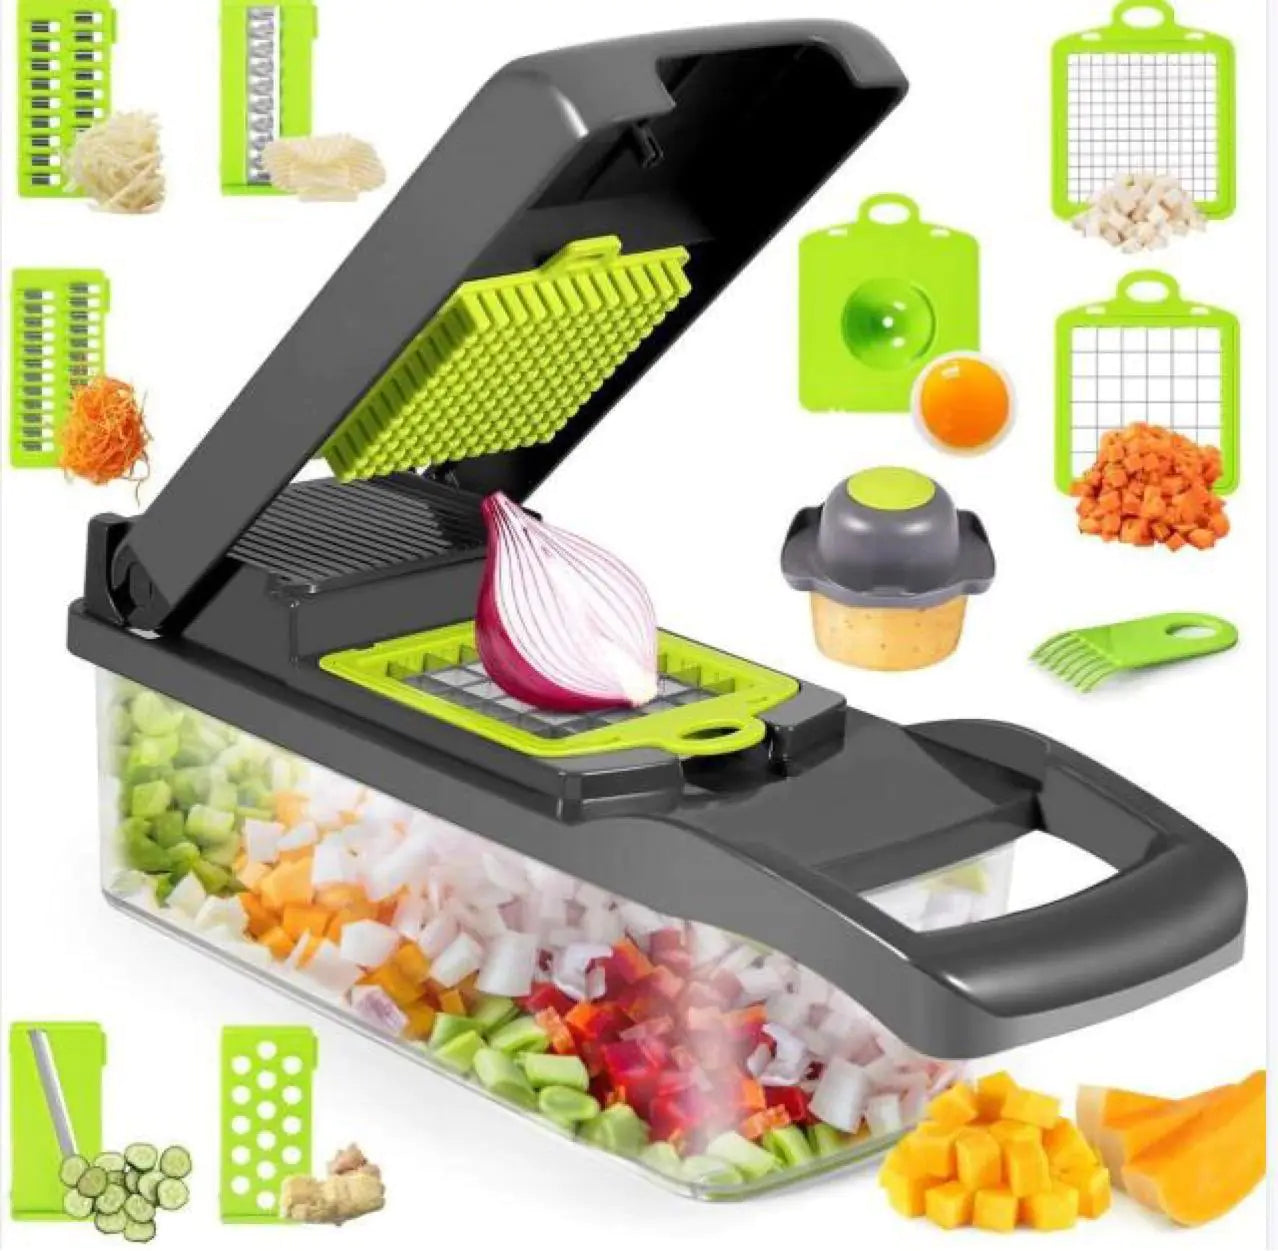 Effortlessly chop veggies with our Kitchen Vegetable Chopper